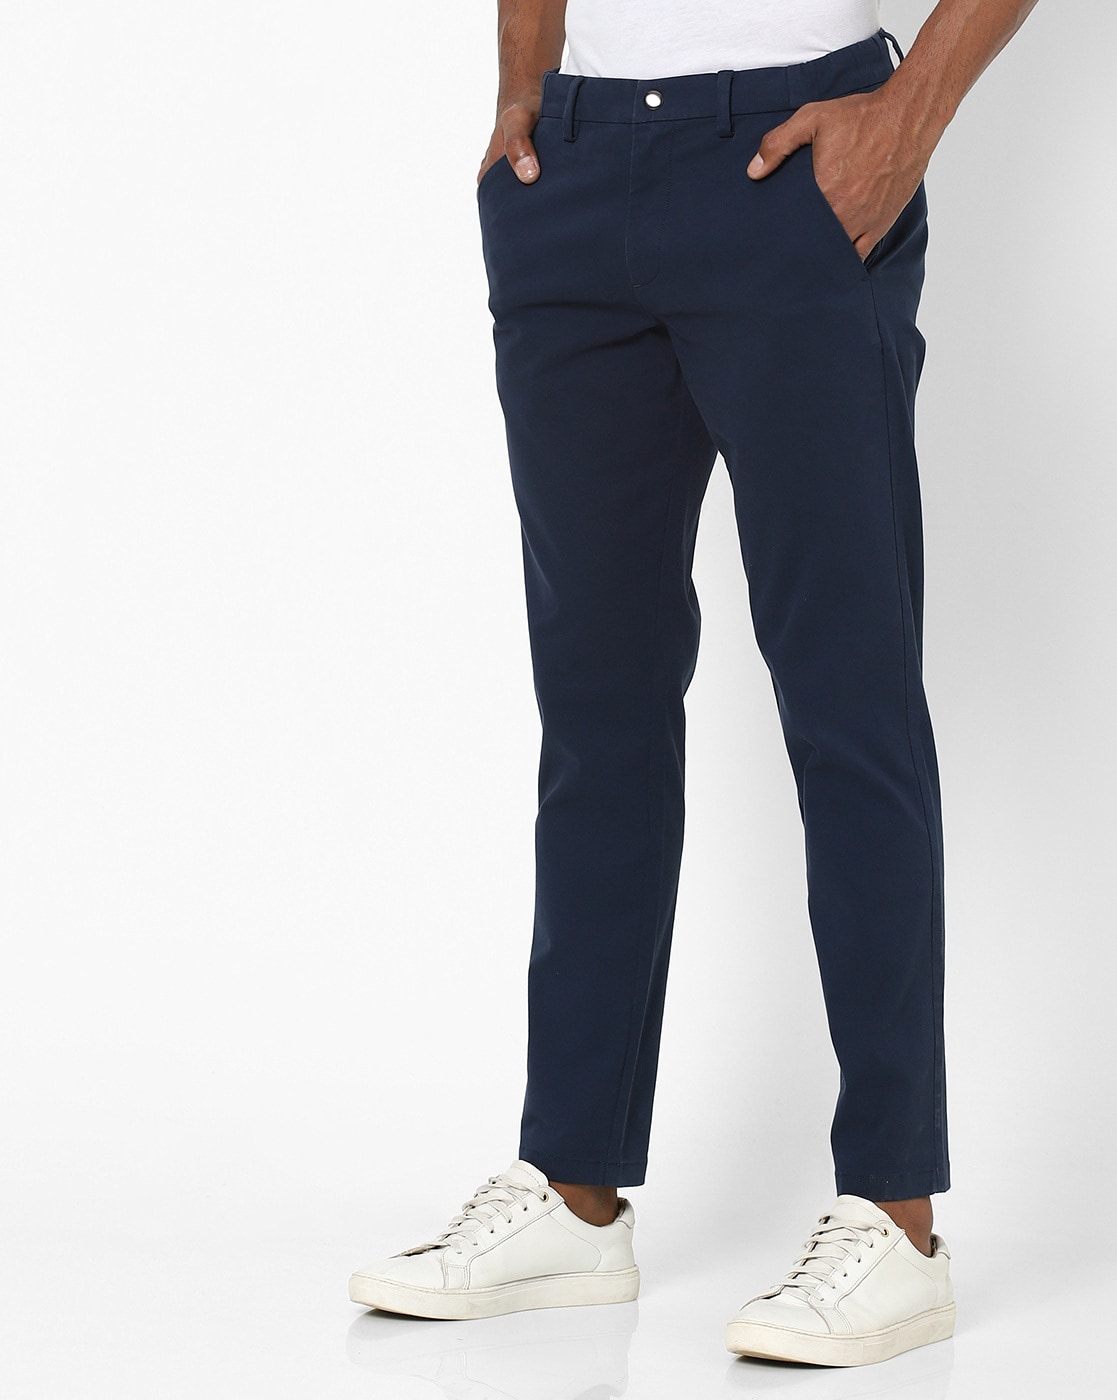 The Good Better Best in Trousers For Men  The HUB